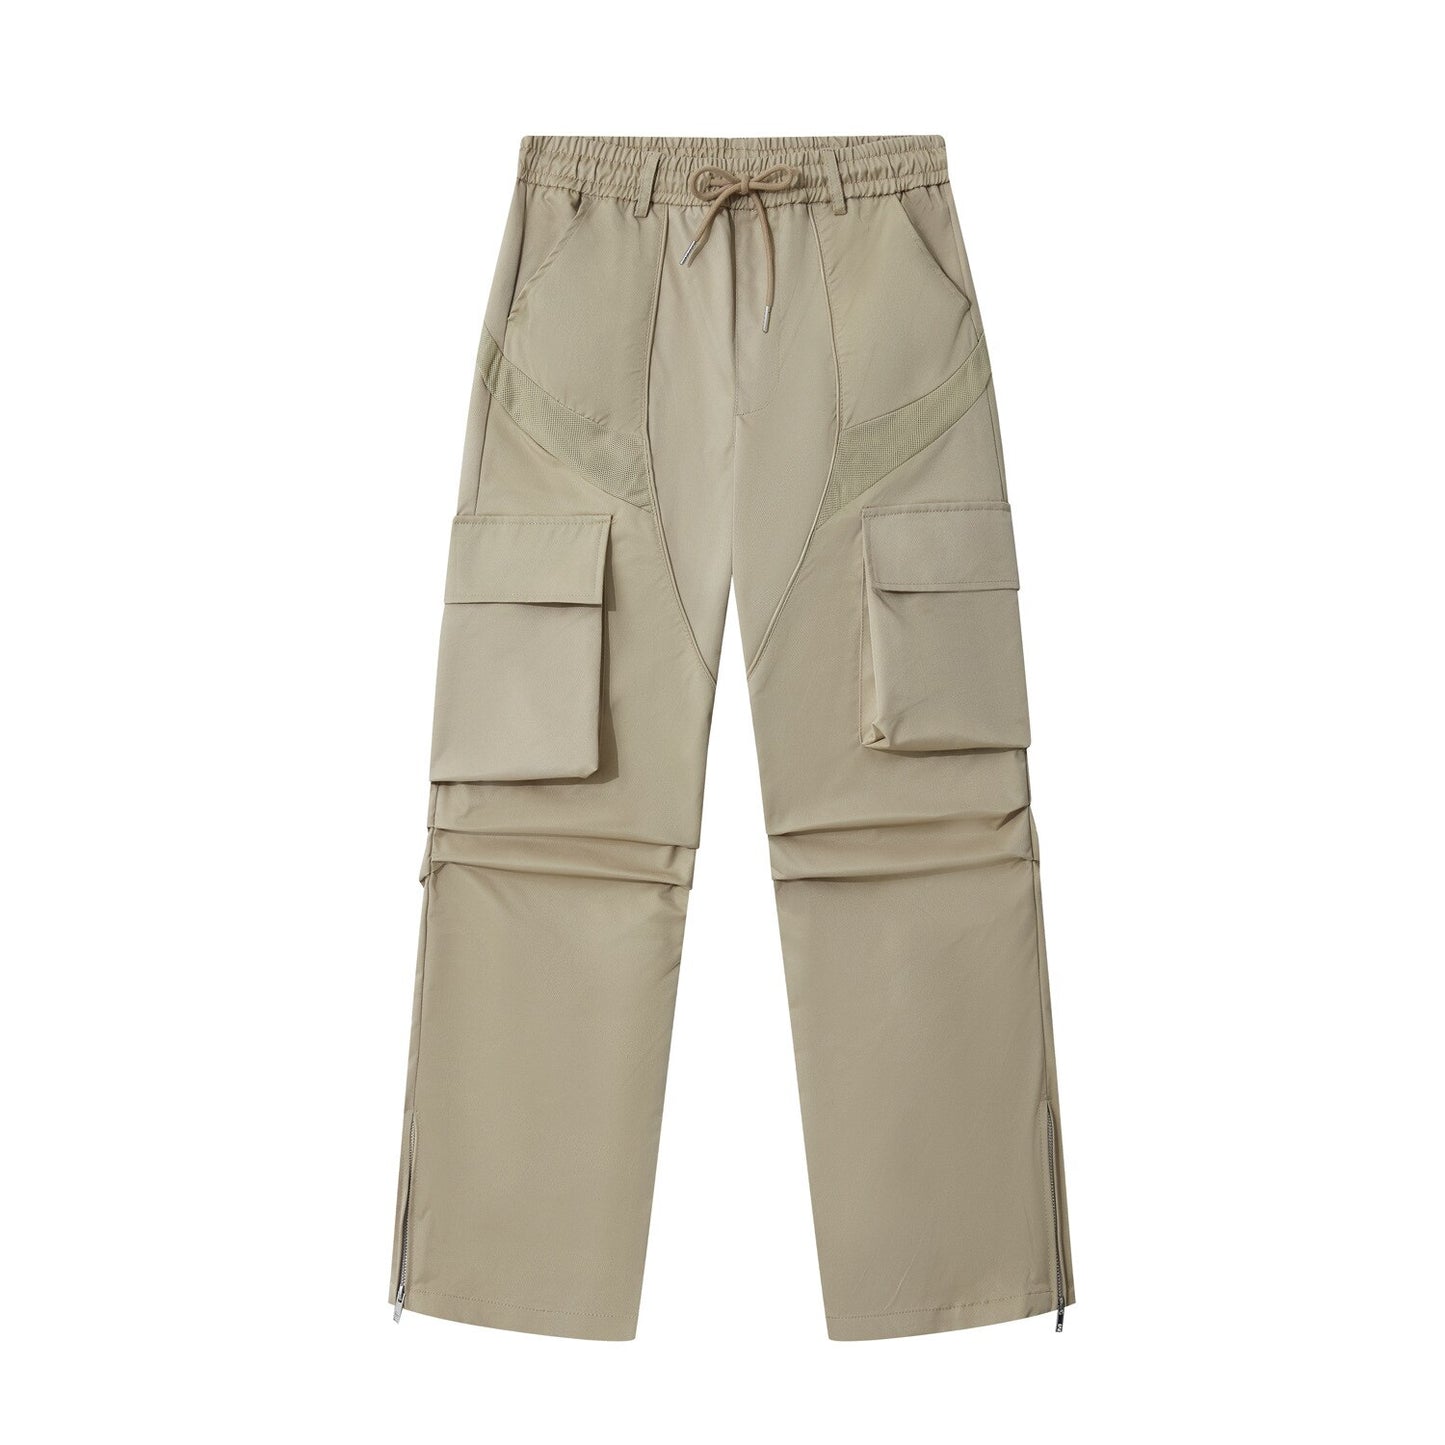 MADEEXTREME Pleated Pockets Casual Cargo Pants